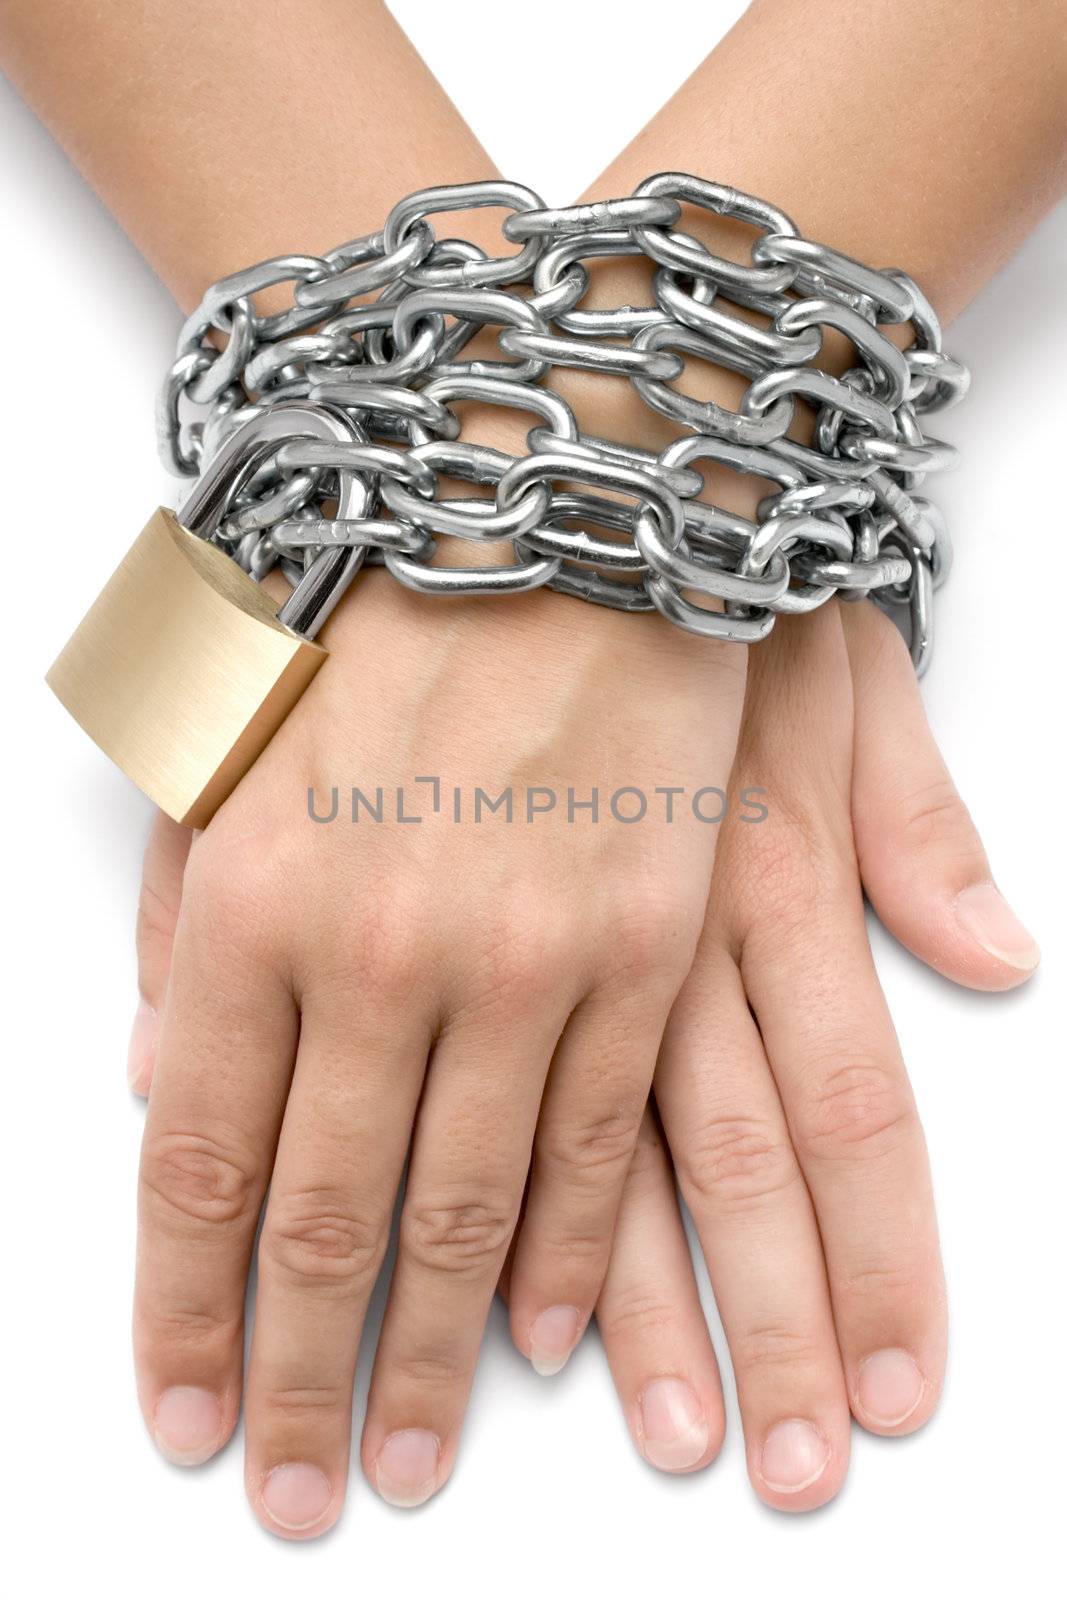 Female hands locked with a metal chain and padlock. Isolated on
a white background.